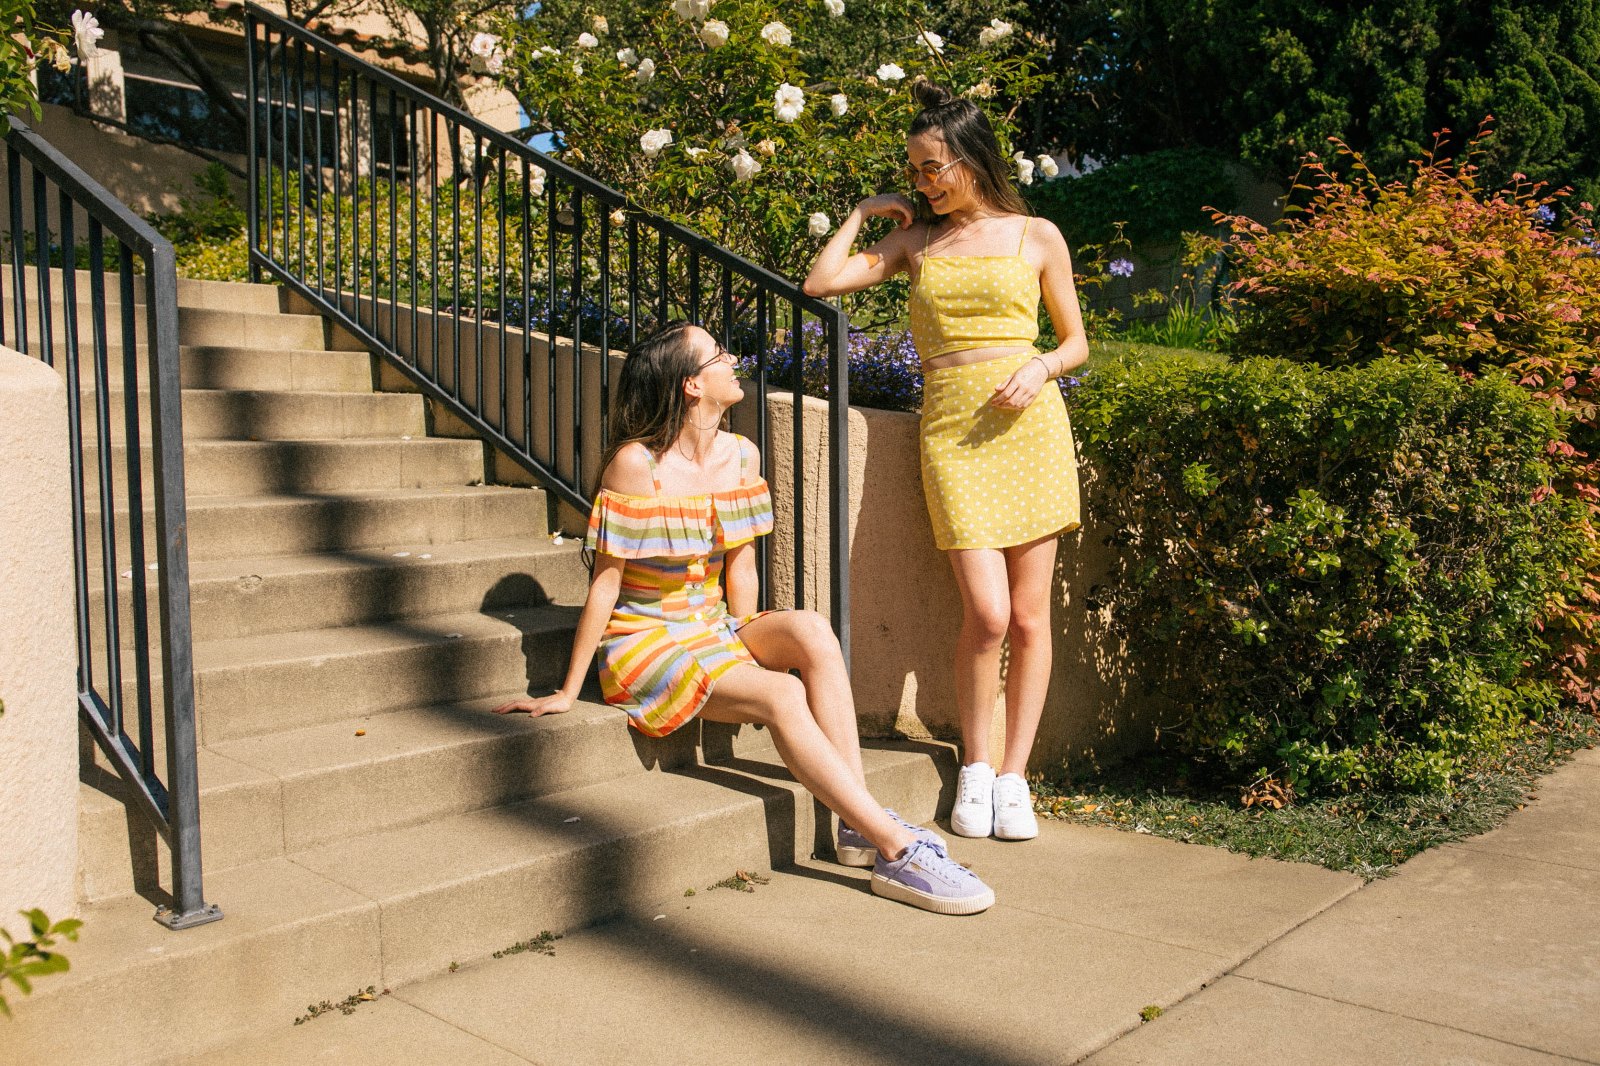 The Merrell Twins Dish On Their True Img Fashion Label